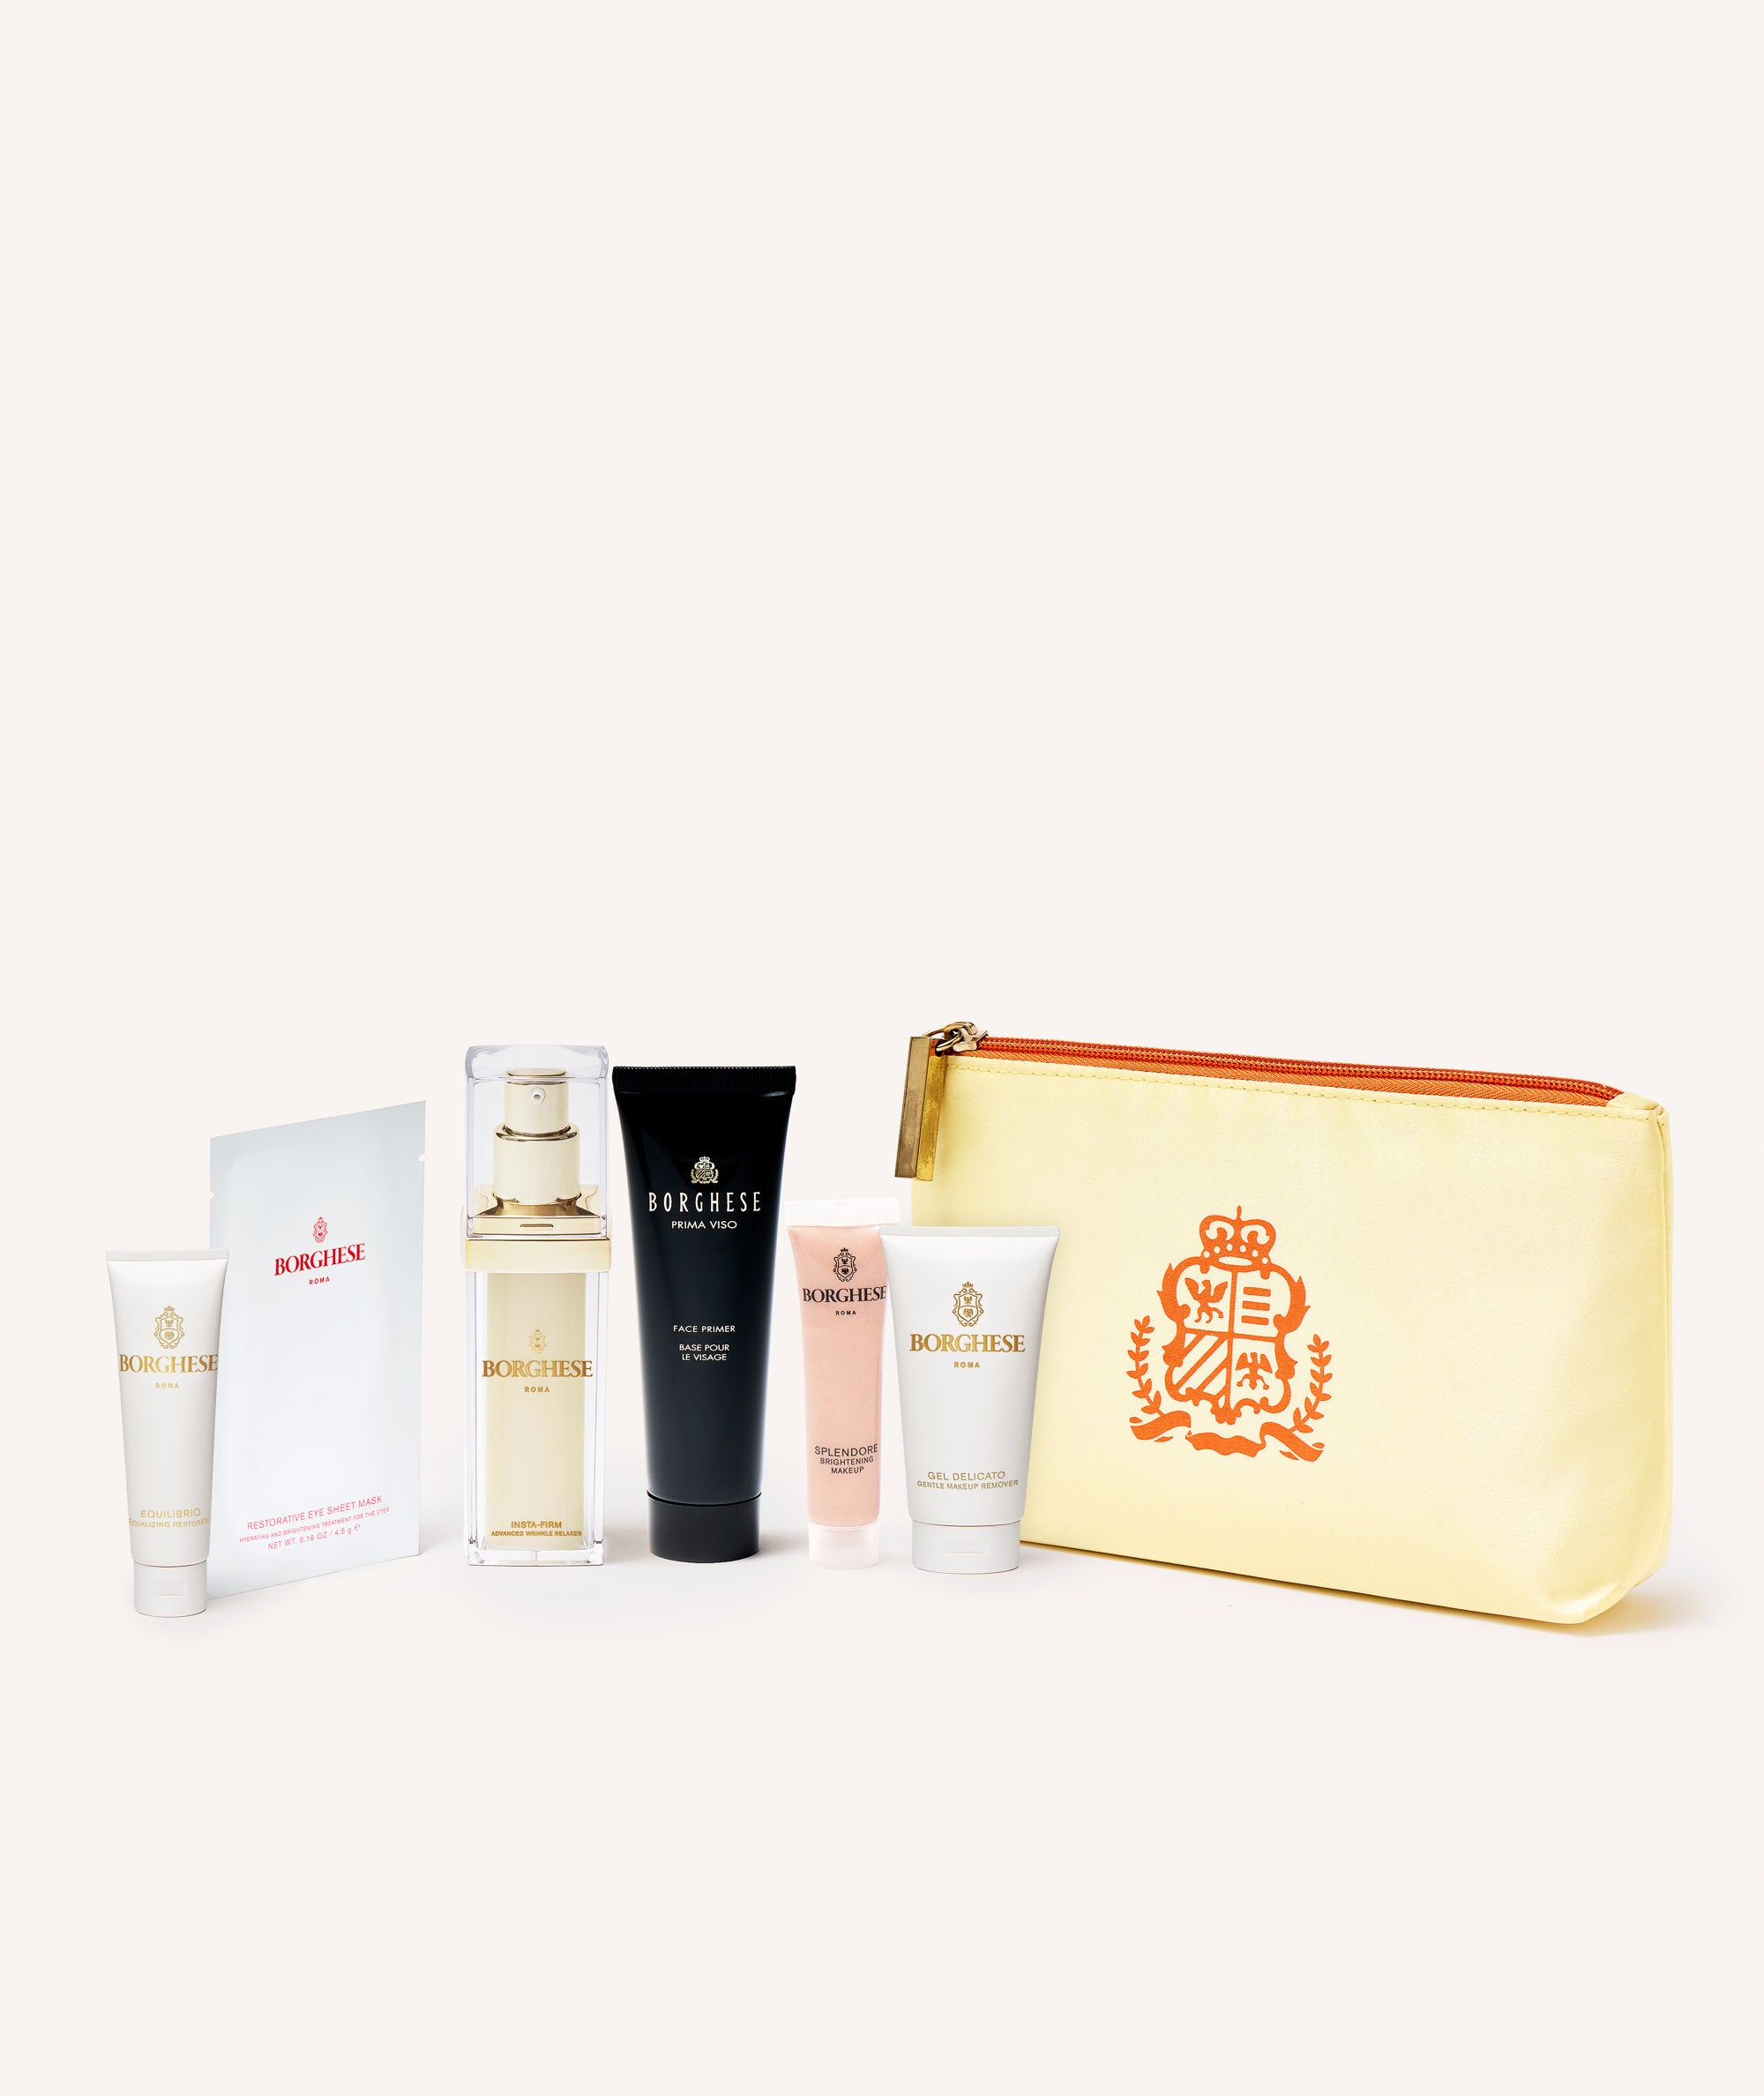 Picture of the Borghese 6-Piece Skin Prep Set contents and signature pouch